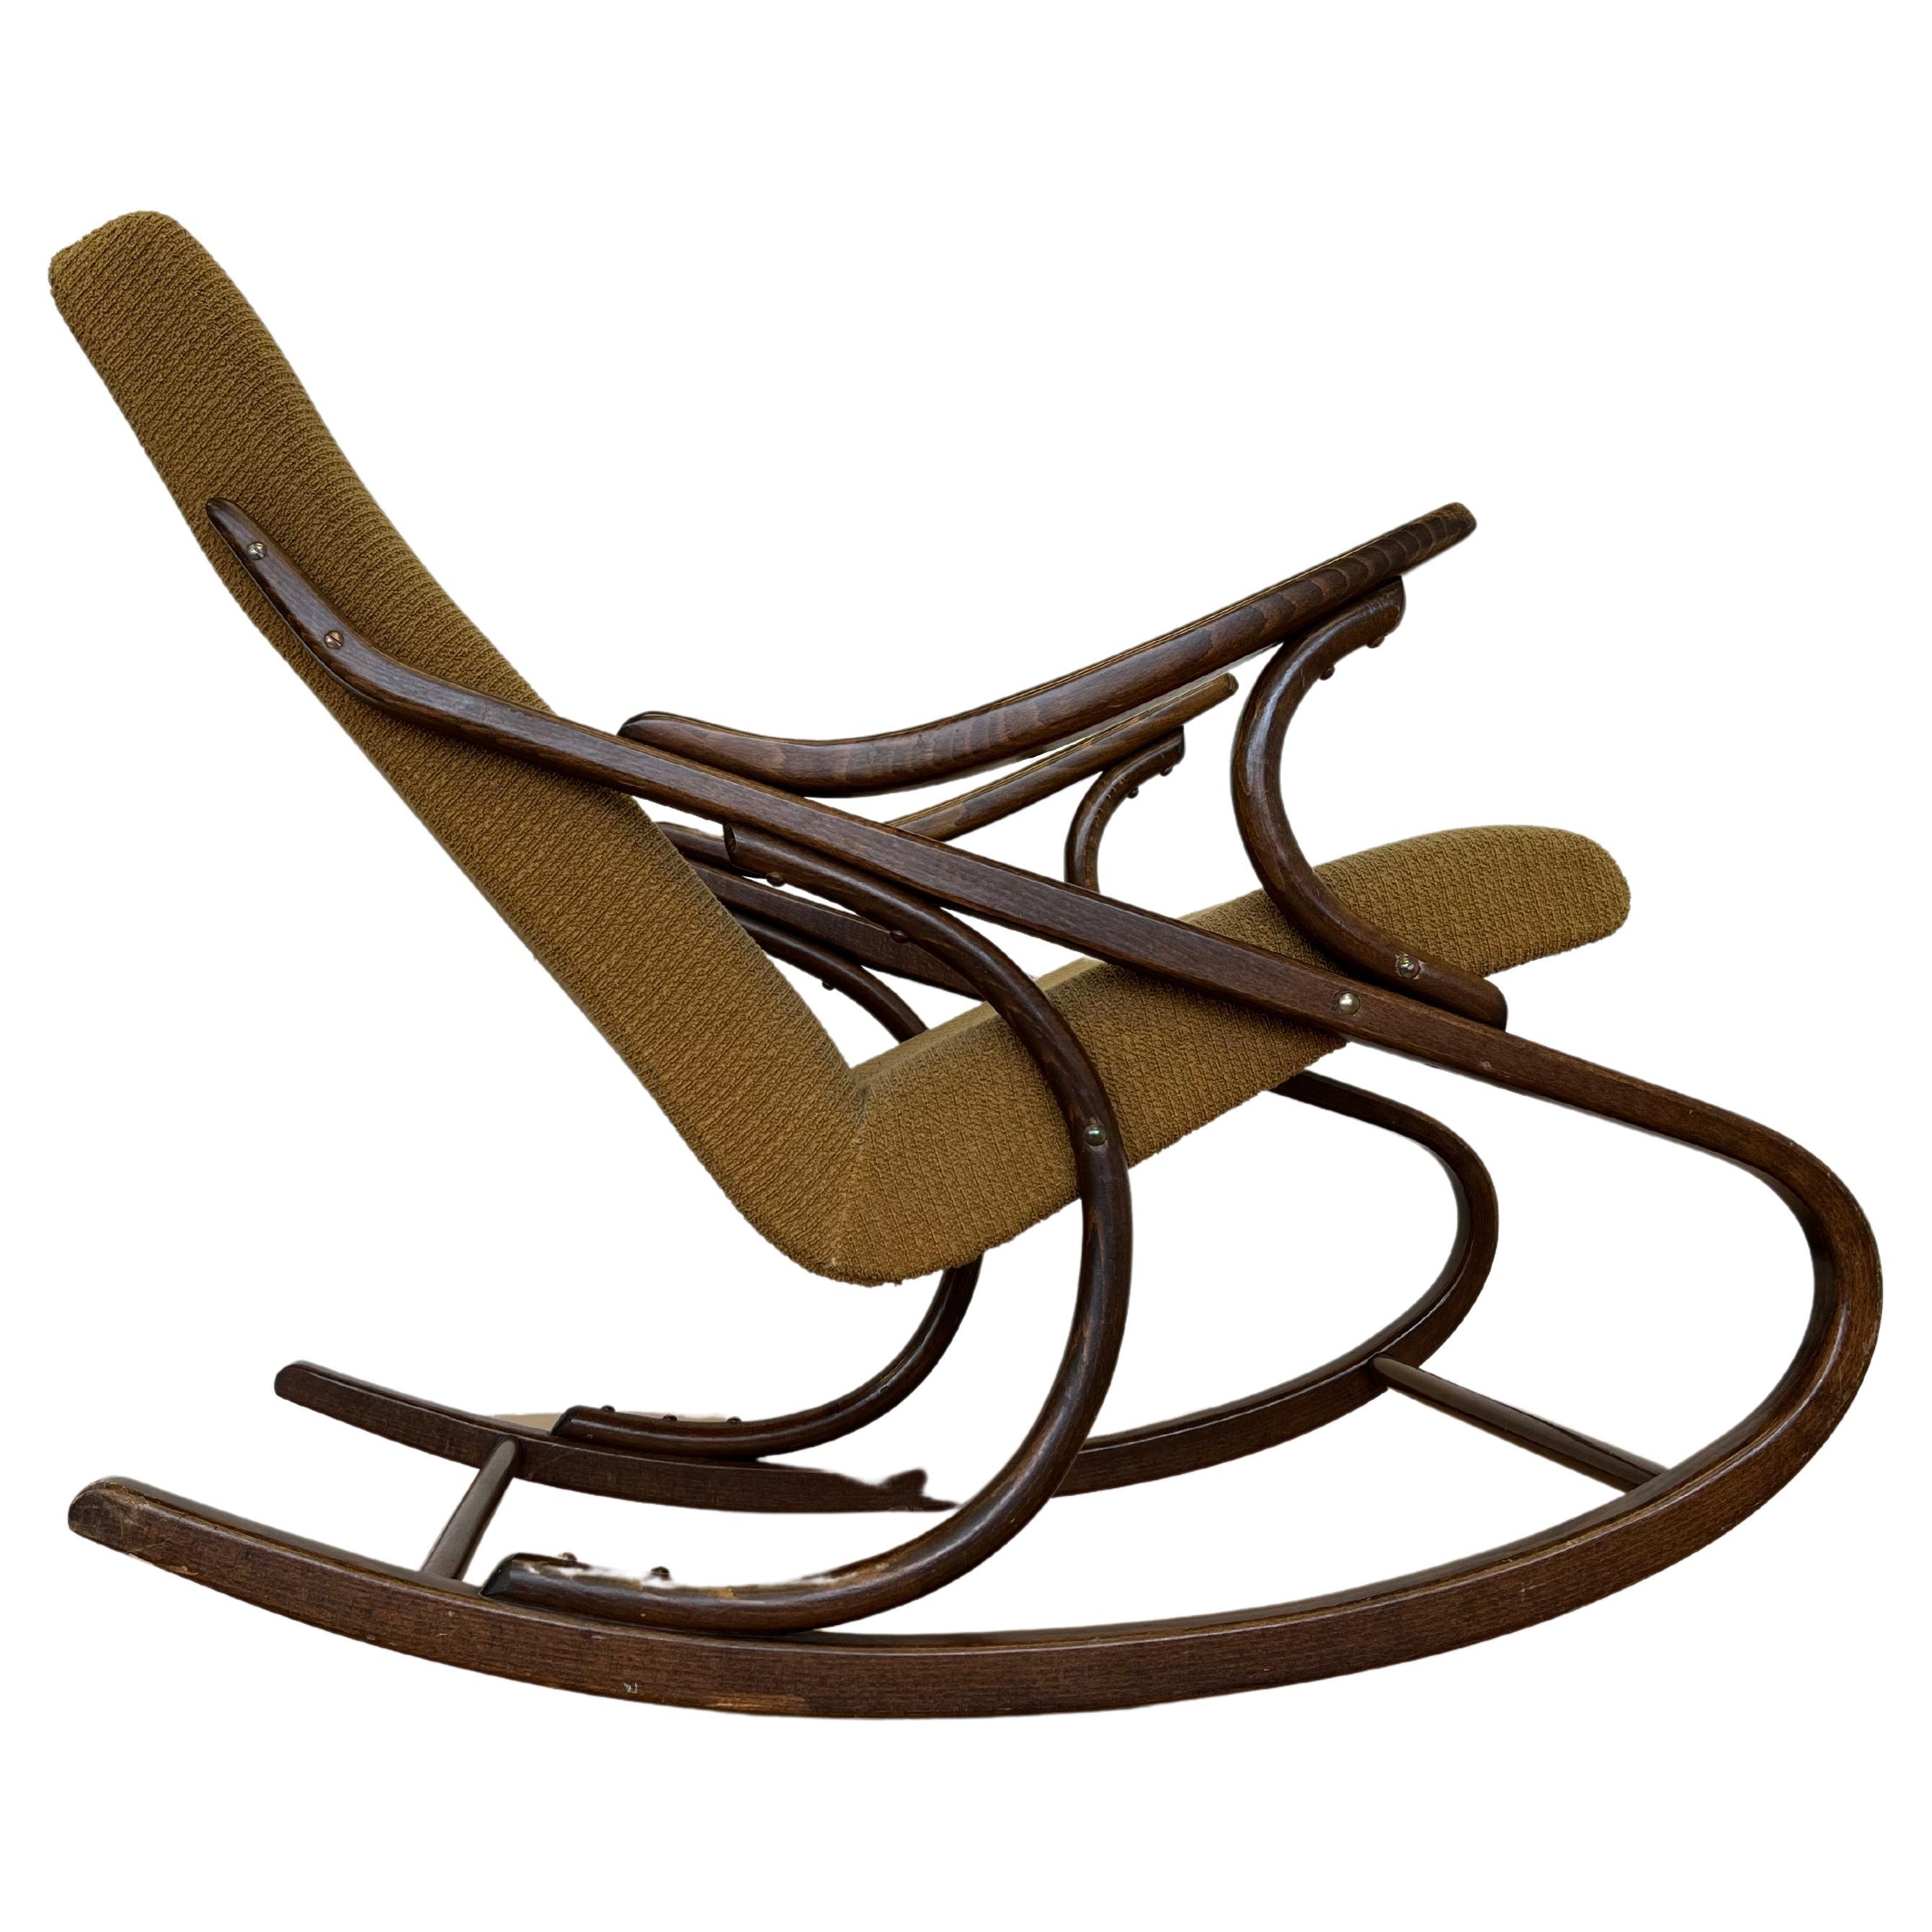 Midcentury Design Rocking Chair by TON / Expo, 1958 For Sale